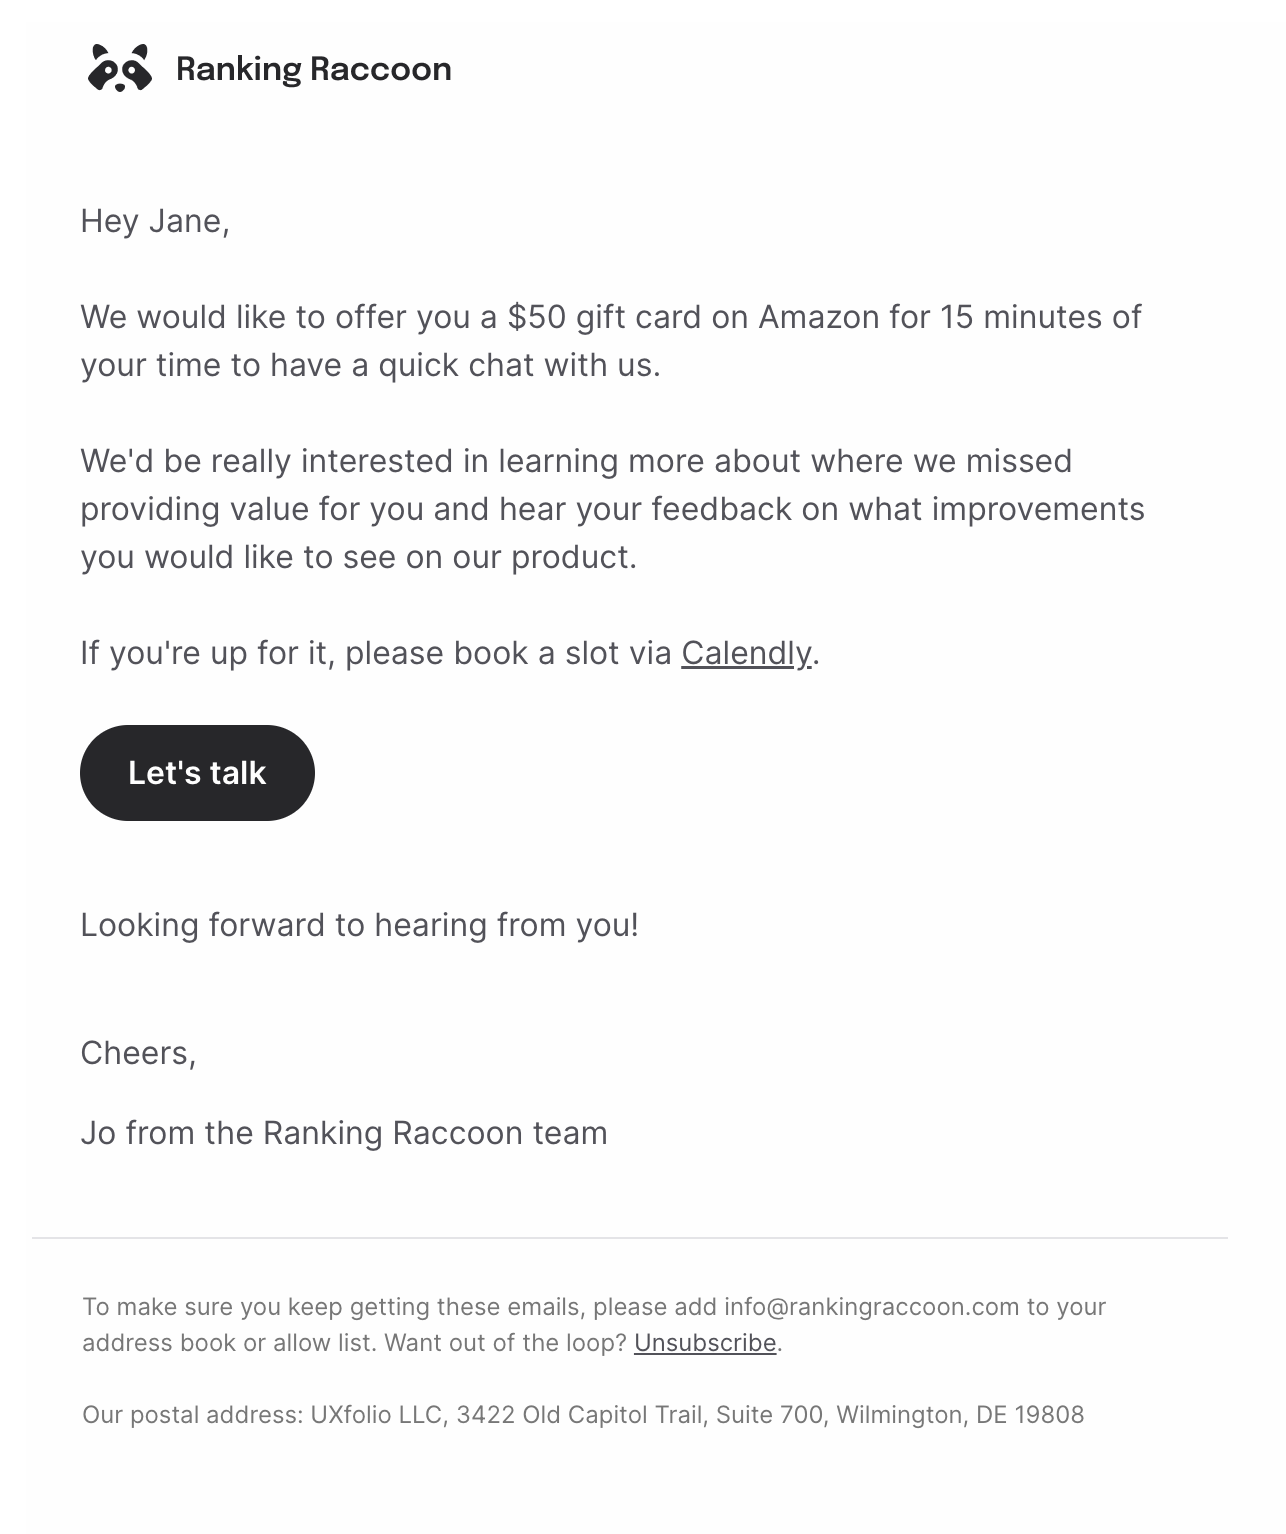 Survey Email Examples: Screenshot of Ranking Raccoon's survey email